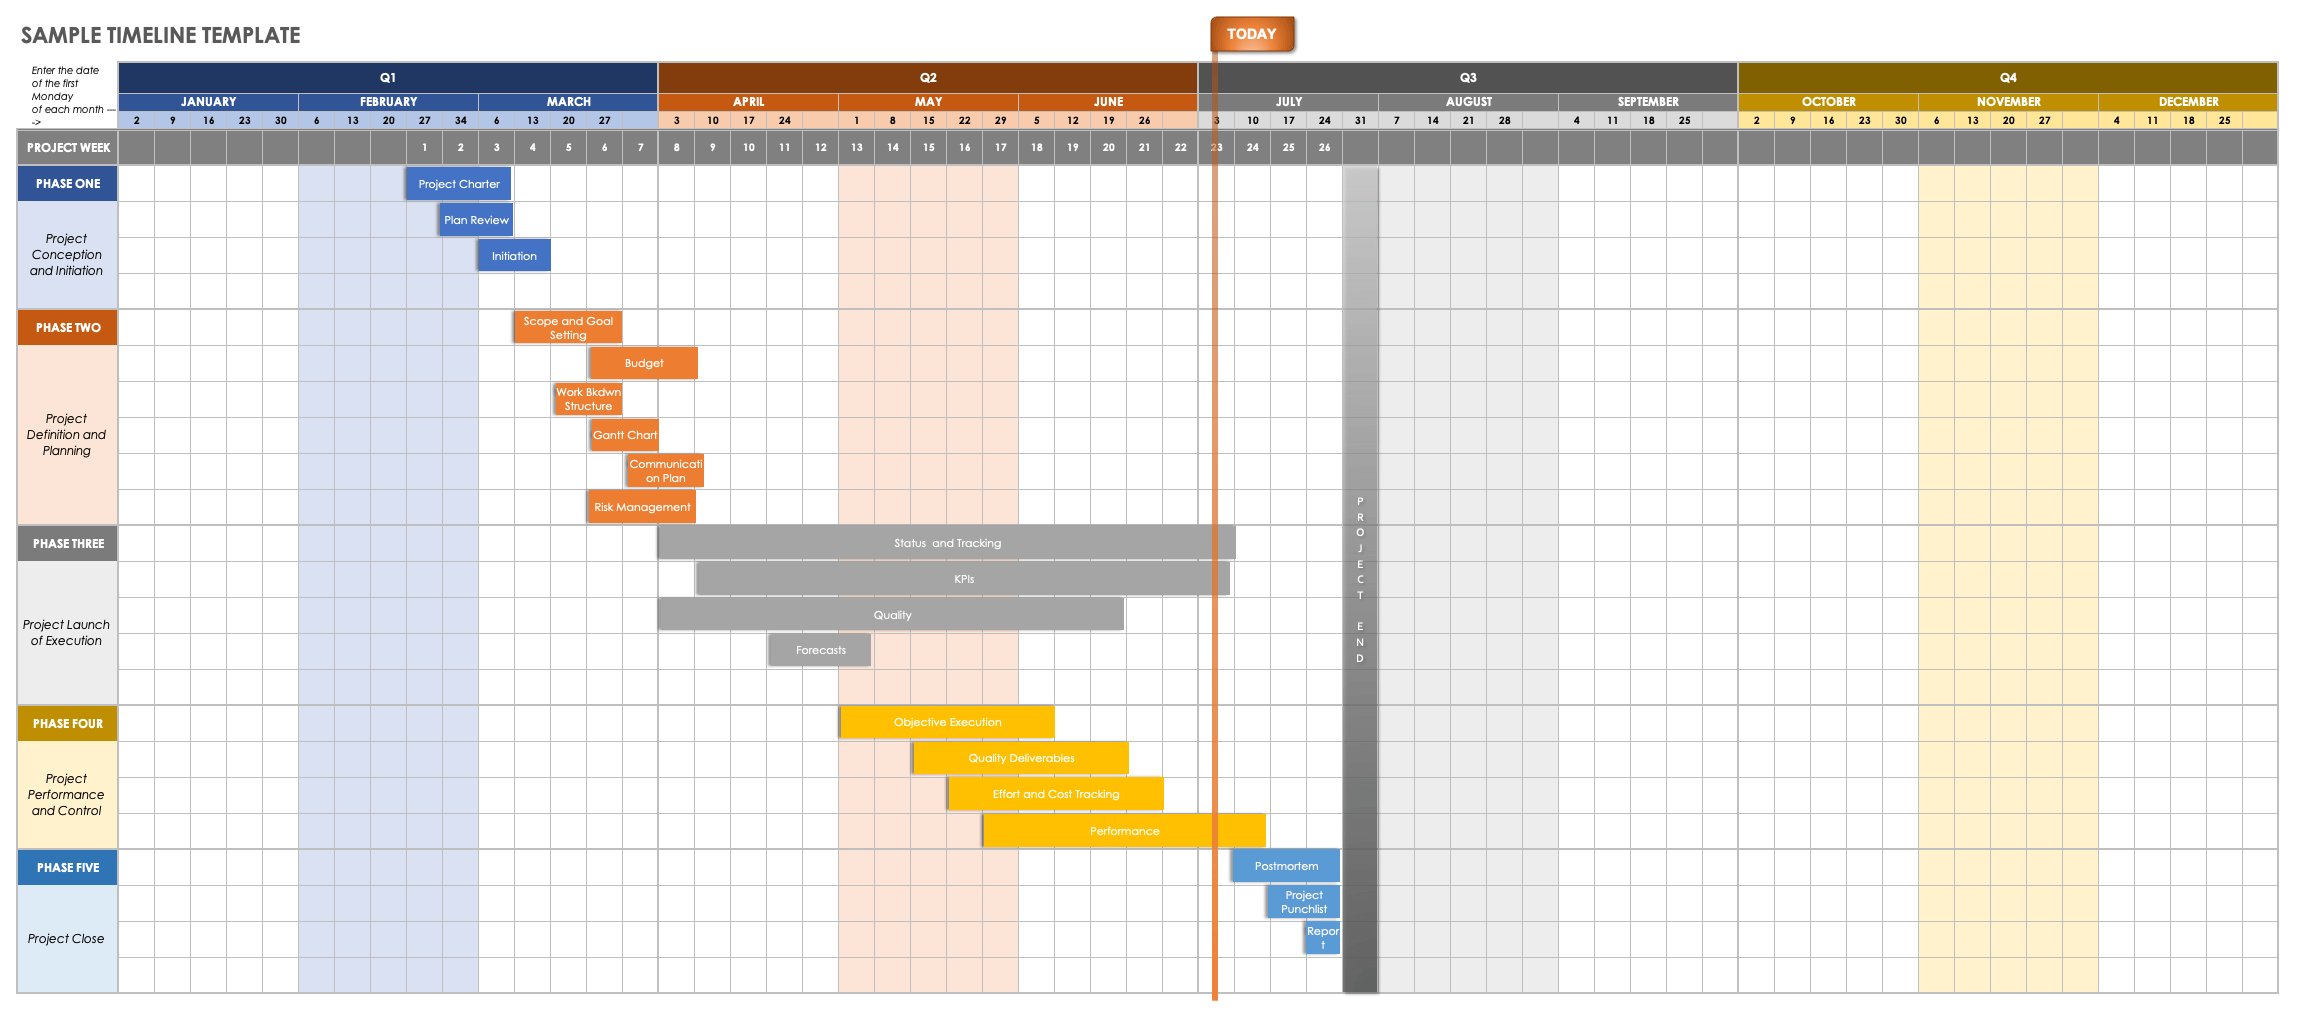 projects-timeline-template-excel